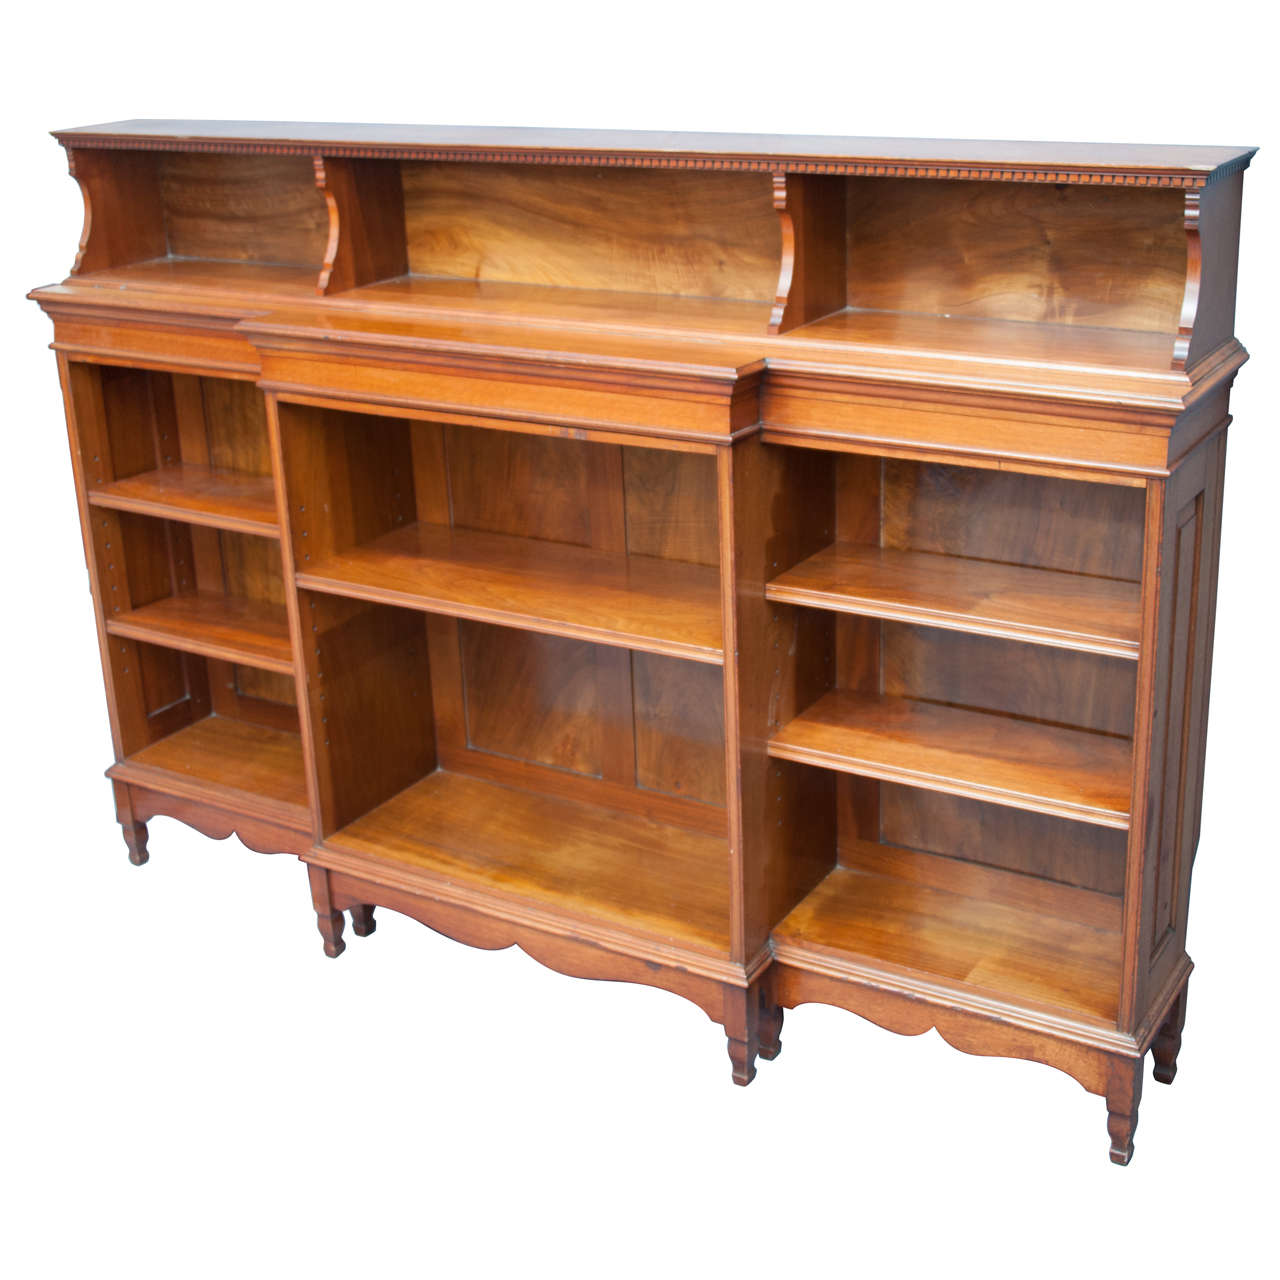 A fine Walnut Bookcase by Morris & Co, designed by George Jack.